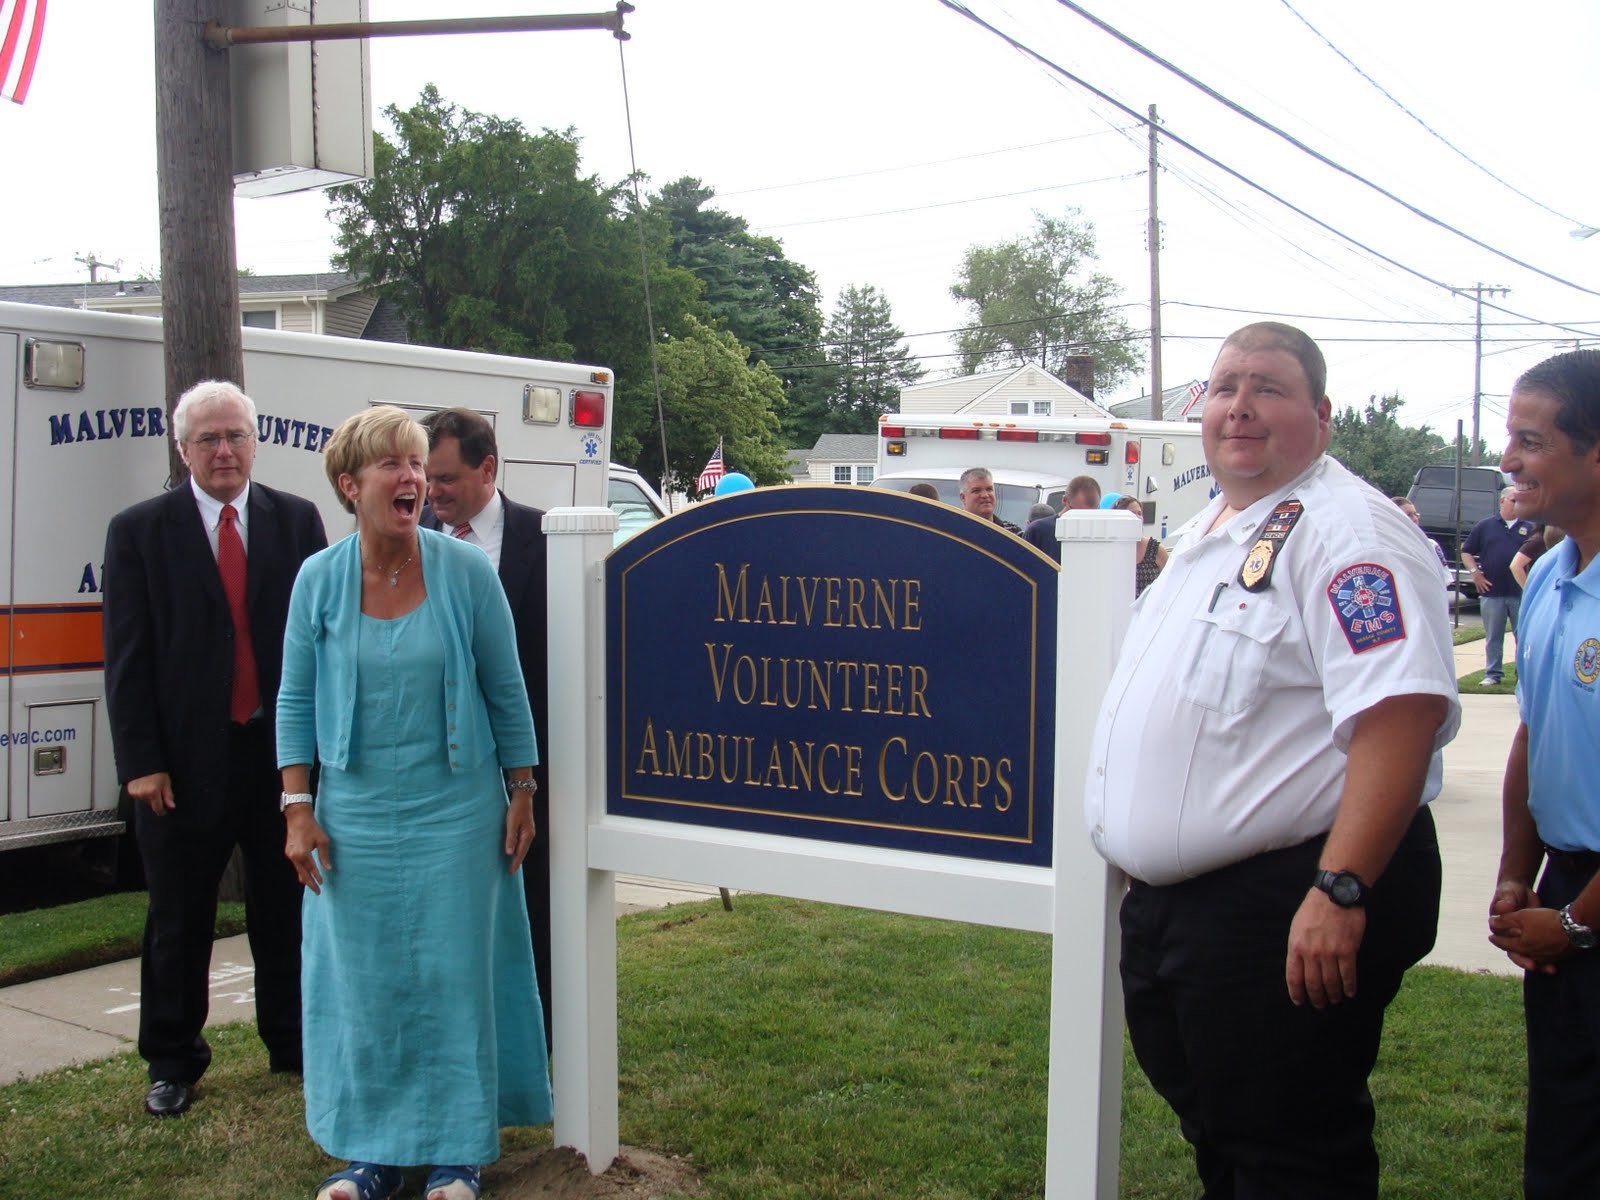 Mayor Patti McDonald, left and past president, Joe Karam, right, at the grand opening of the Malverne Volunteer Ambulance Corps headquarters in 2012.